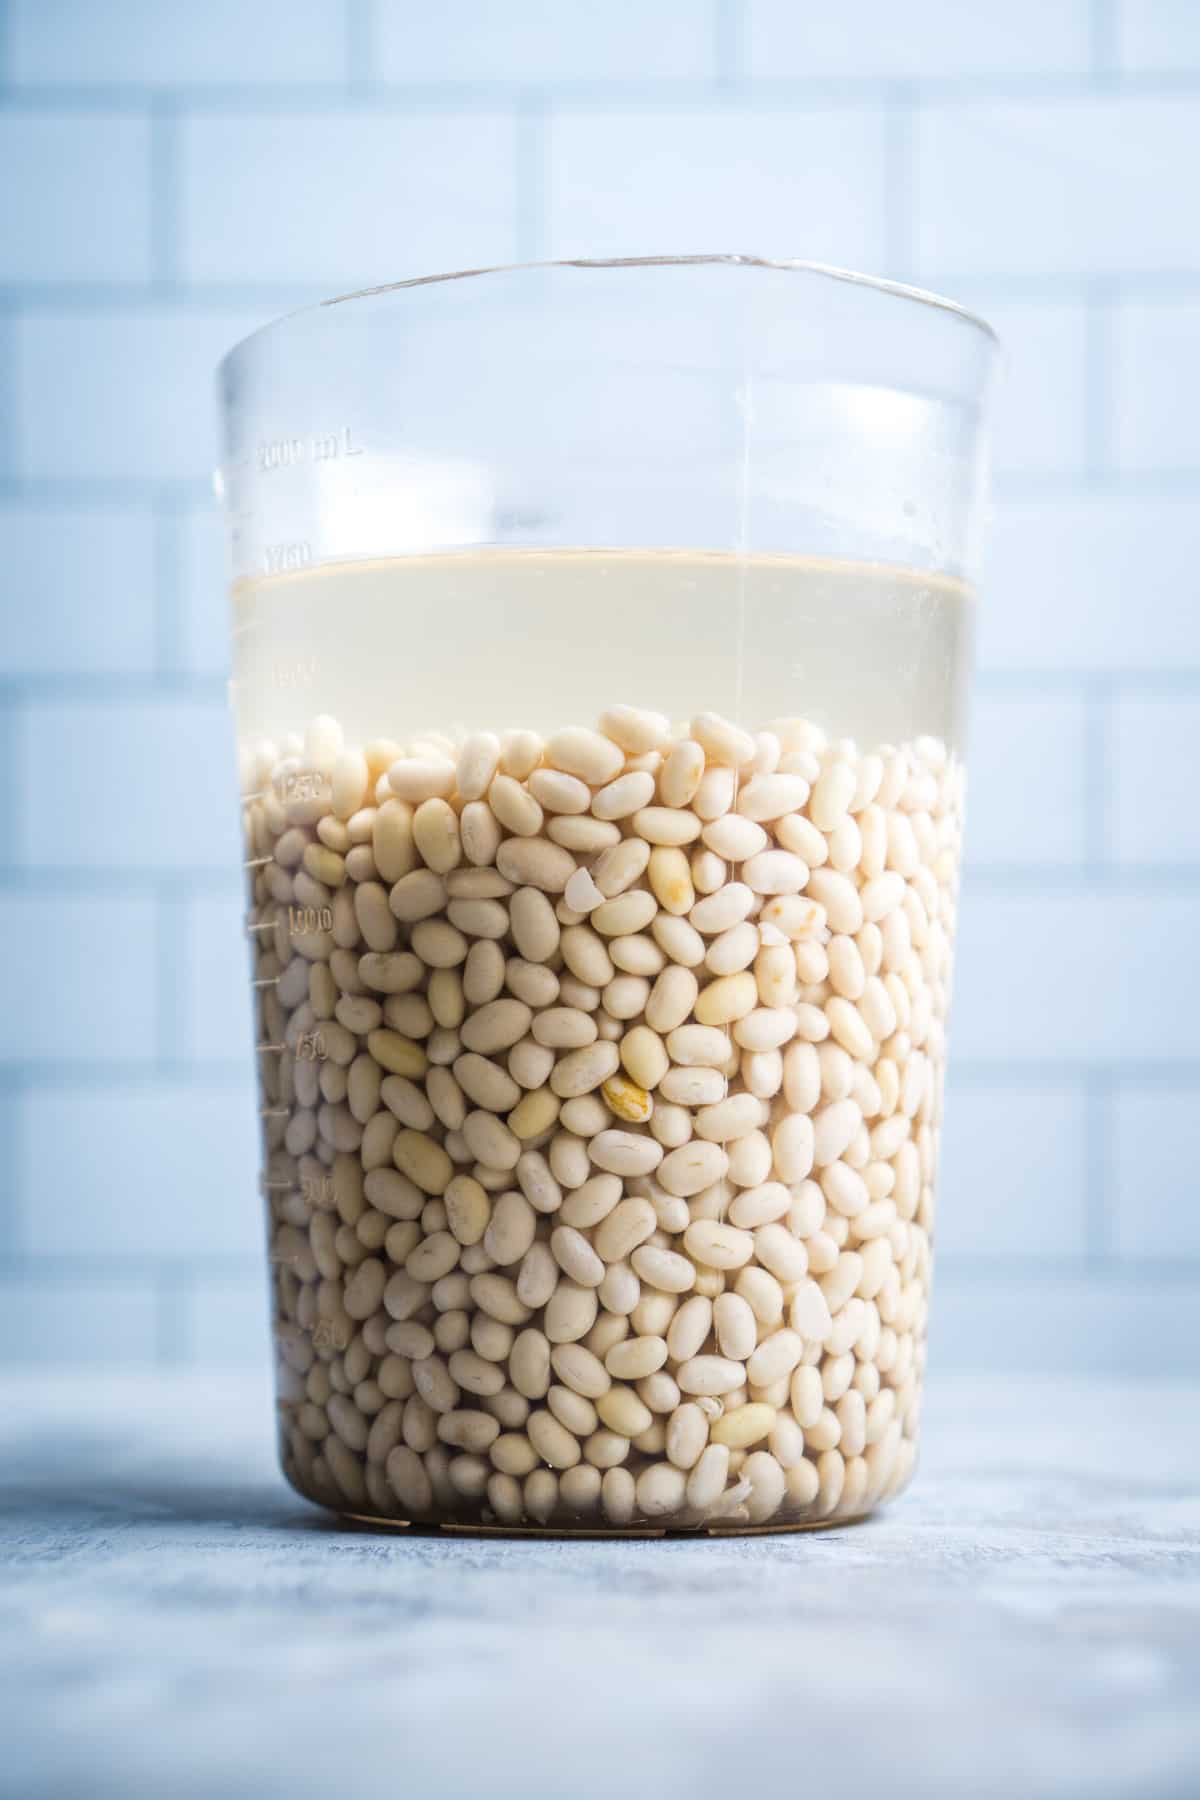 White beans soaking in large pitcher